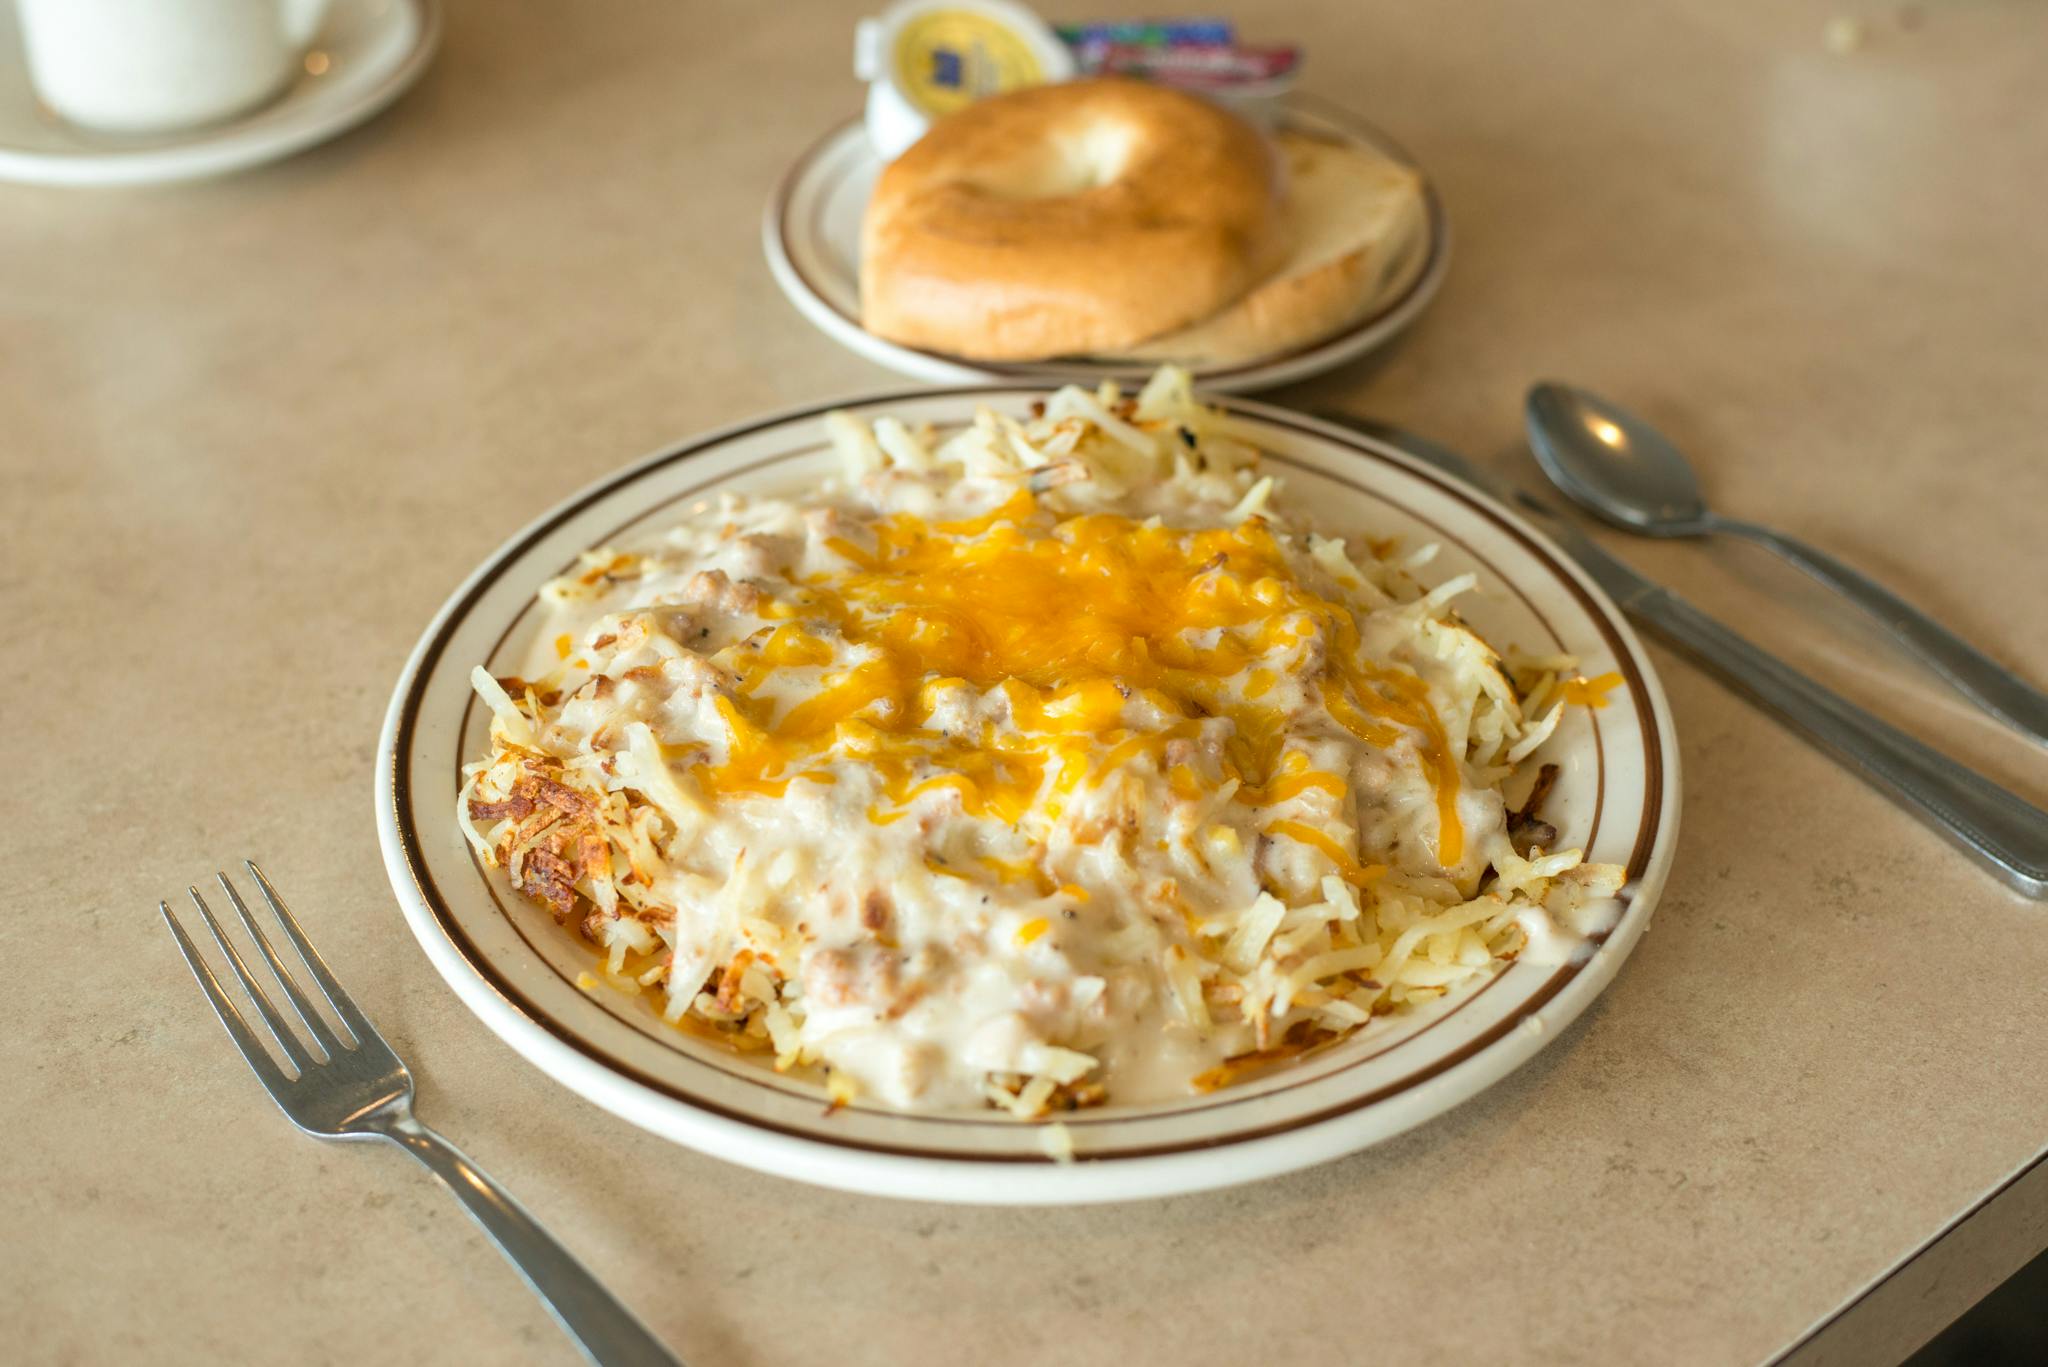 Country Style Stuffed Hash Browns Breakfast from The Pancake Place in Green Bay, WI